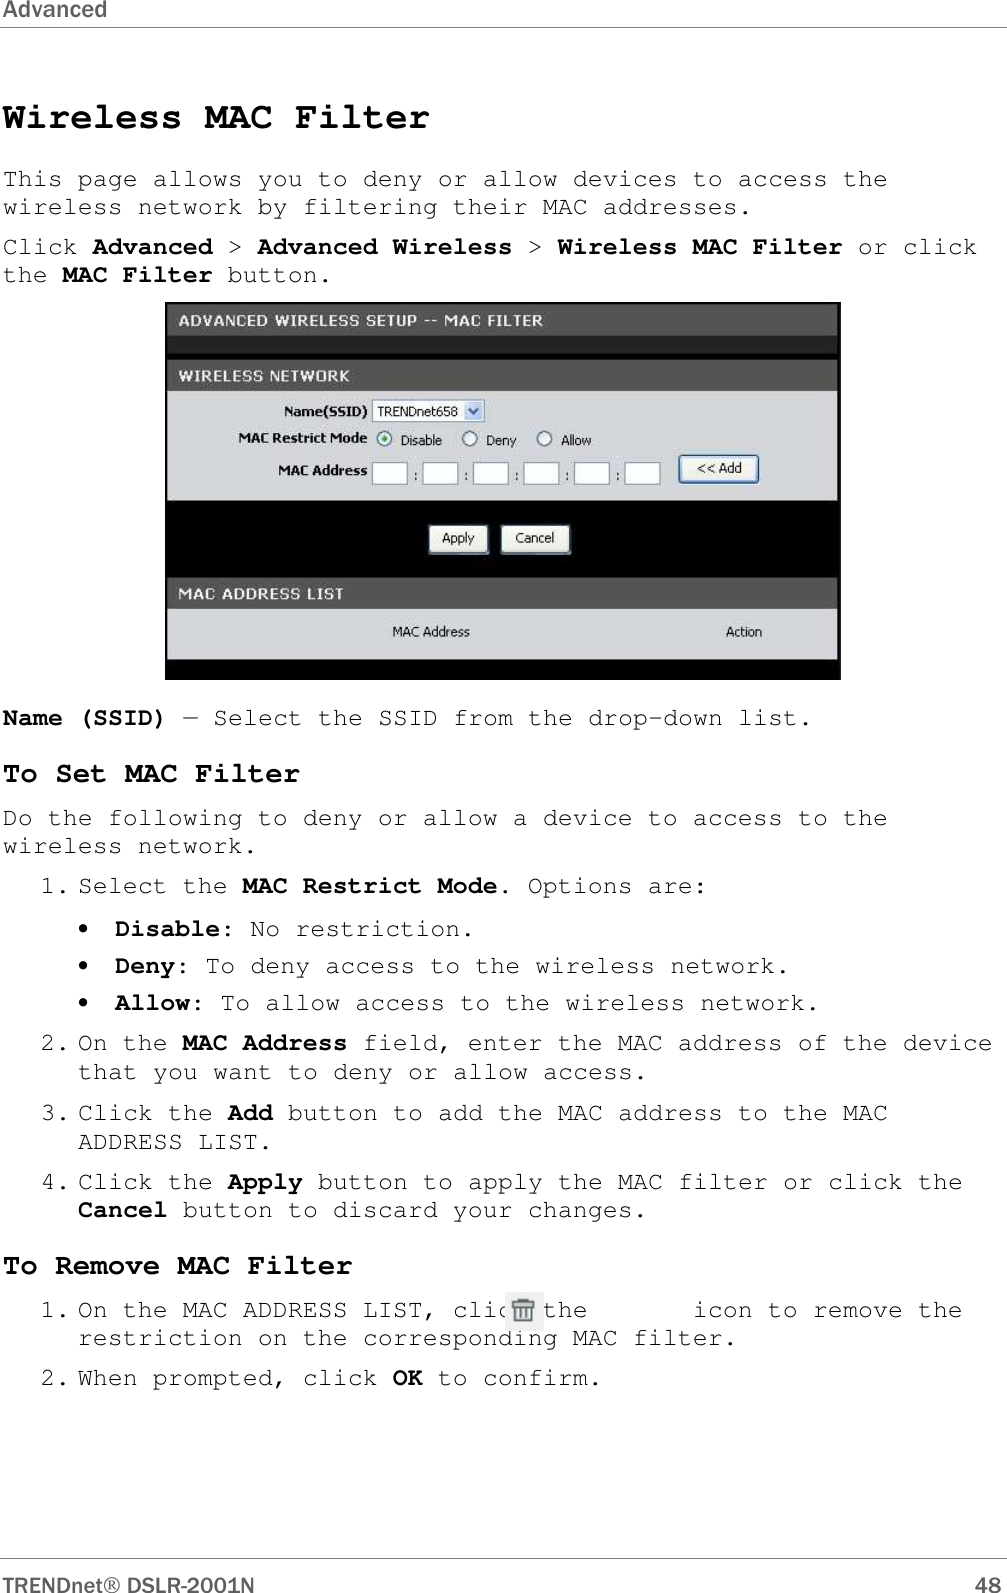 Advanced      TRENDnet DSLR-2001N        48 Wireless MAC Filter This page allows you to deny or allow devices to access the wireless network by filtering their MAC addresses. Click Advanced &gt; Advanced Wireless &gt; Wireless MAC Filter or click the MAC Filter button.  Name (SSID) — Select the SSID from the drop-down list. To Set MAC Filter Do the following to deny or allow a device to access to the wireless network. 1. Select the MAC Restrict Mode. Options are: • Disable: No restriction. • Deny: To deny access to the wireless network. • Allow: To allow access to the wireless network. 2. On the MAC Address field, enter the MAC address of the device that you want to deny or allow access. 3. Click the Add button to add the MAC address to the MAC ADDRESS LIST. 4. Click the Apply button to apply the MAC filter or click the Cancel button to discard your changes. To Remove MAC Filter 1. On the MAC ADDRESS LIST, click the       icon to remove the restriction on the corresponding MAC filter. 2. When prompted, click OK to confirm. 